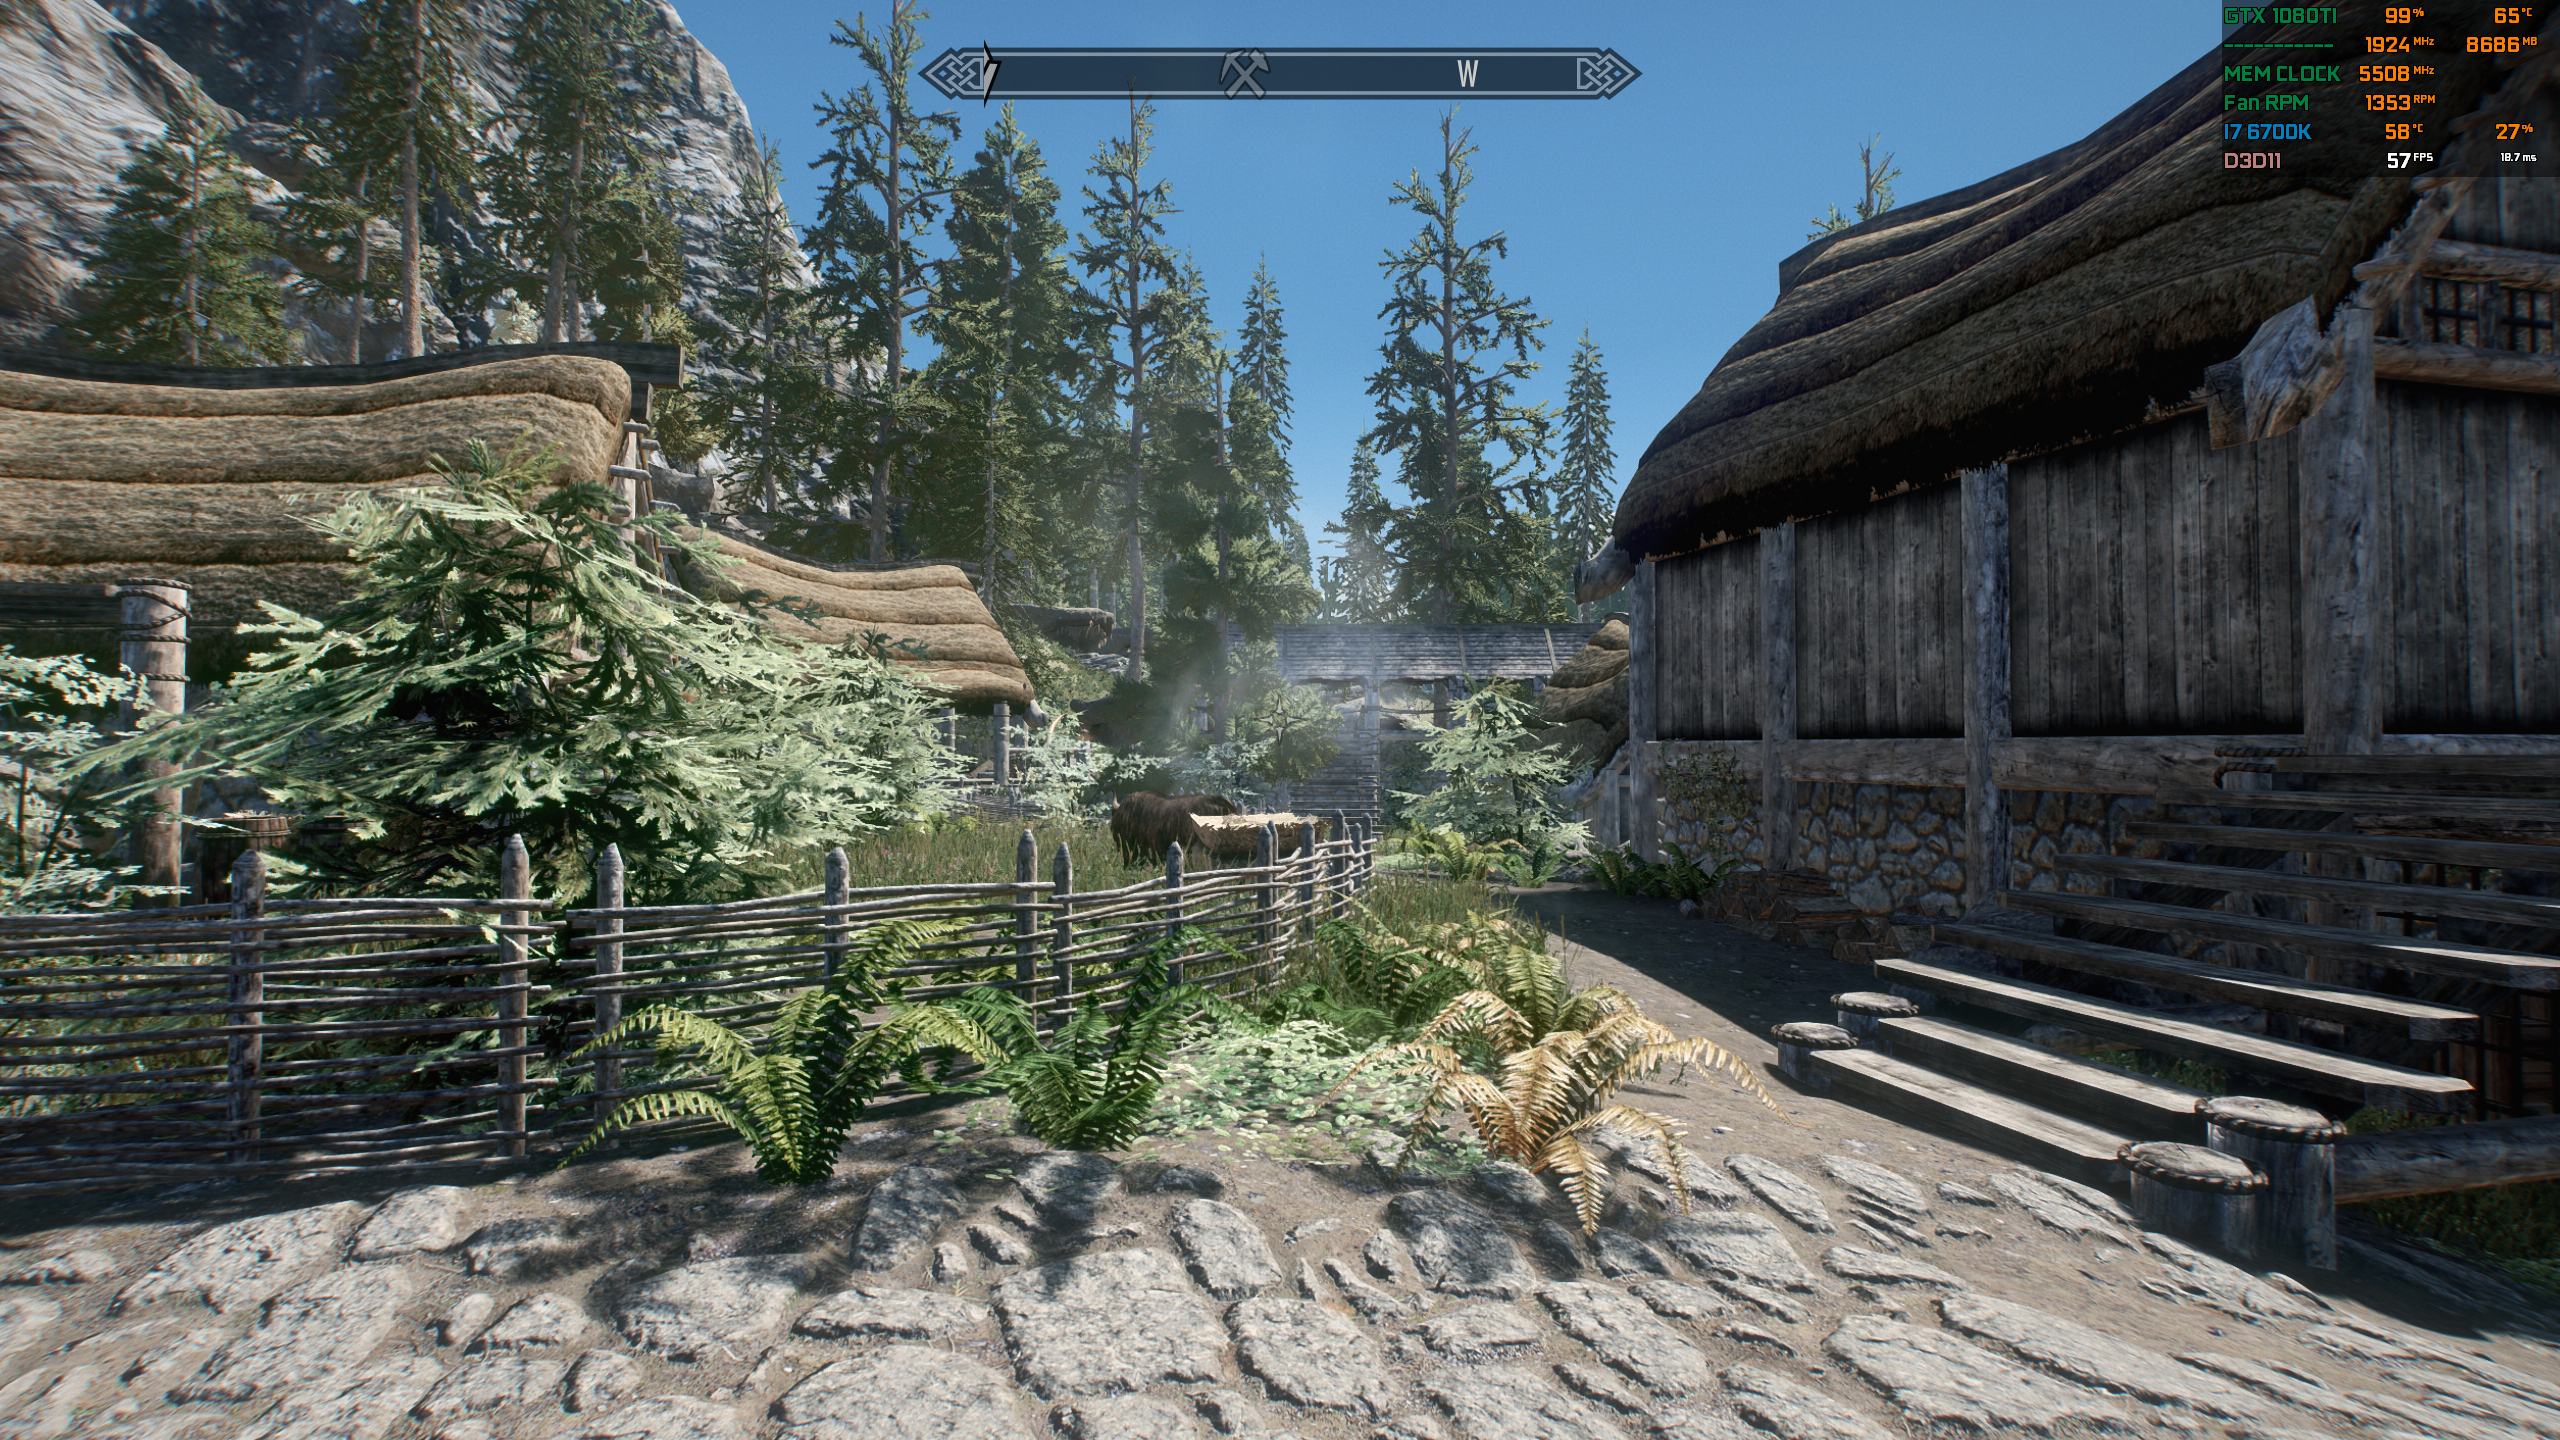 Gtx 1080 Vs 4k Max Modded Skyrim At 2k Res Anandtech Forums Technology Hardware Software And Deals